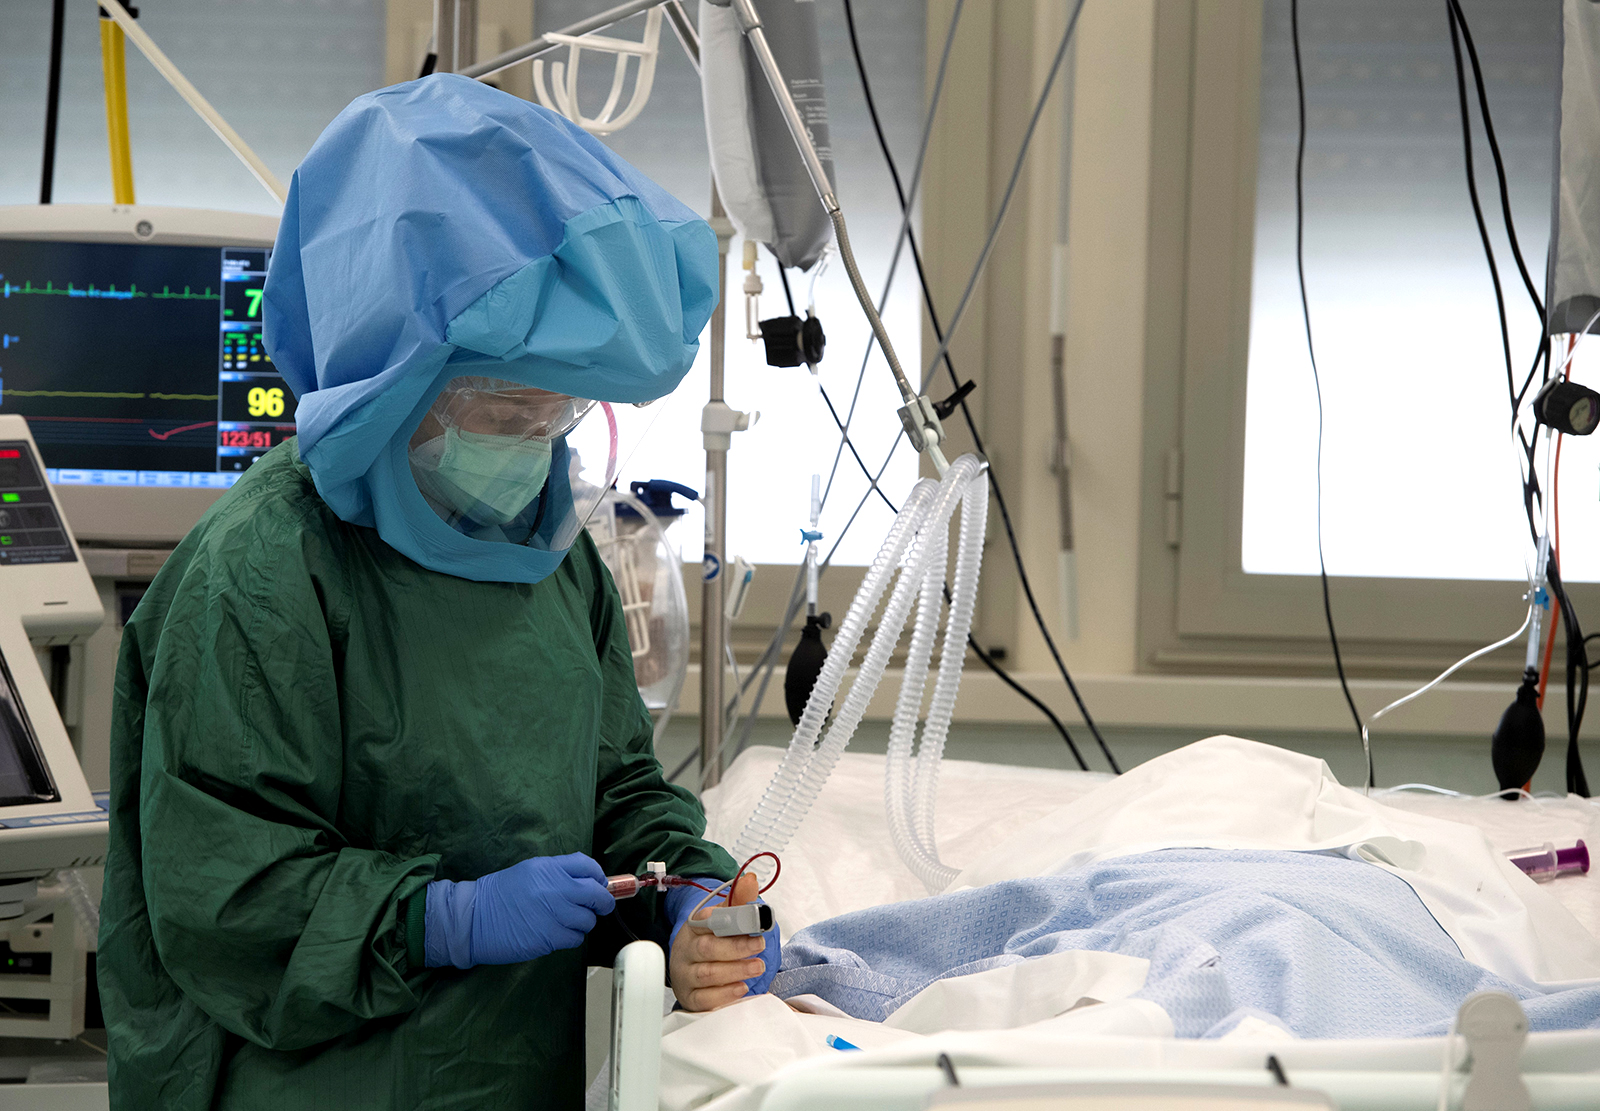 A health worker wearing protective gear takes care of a patient at the intensive care unit, treating COVID-19 patients, of the Tor Vergata Hospital in Rome, on May 12.